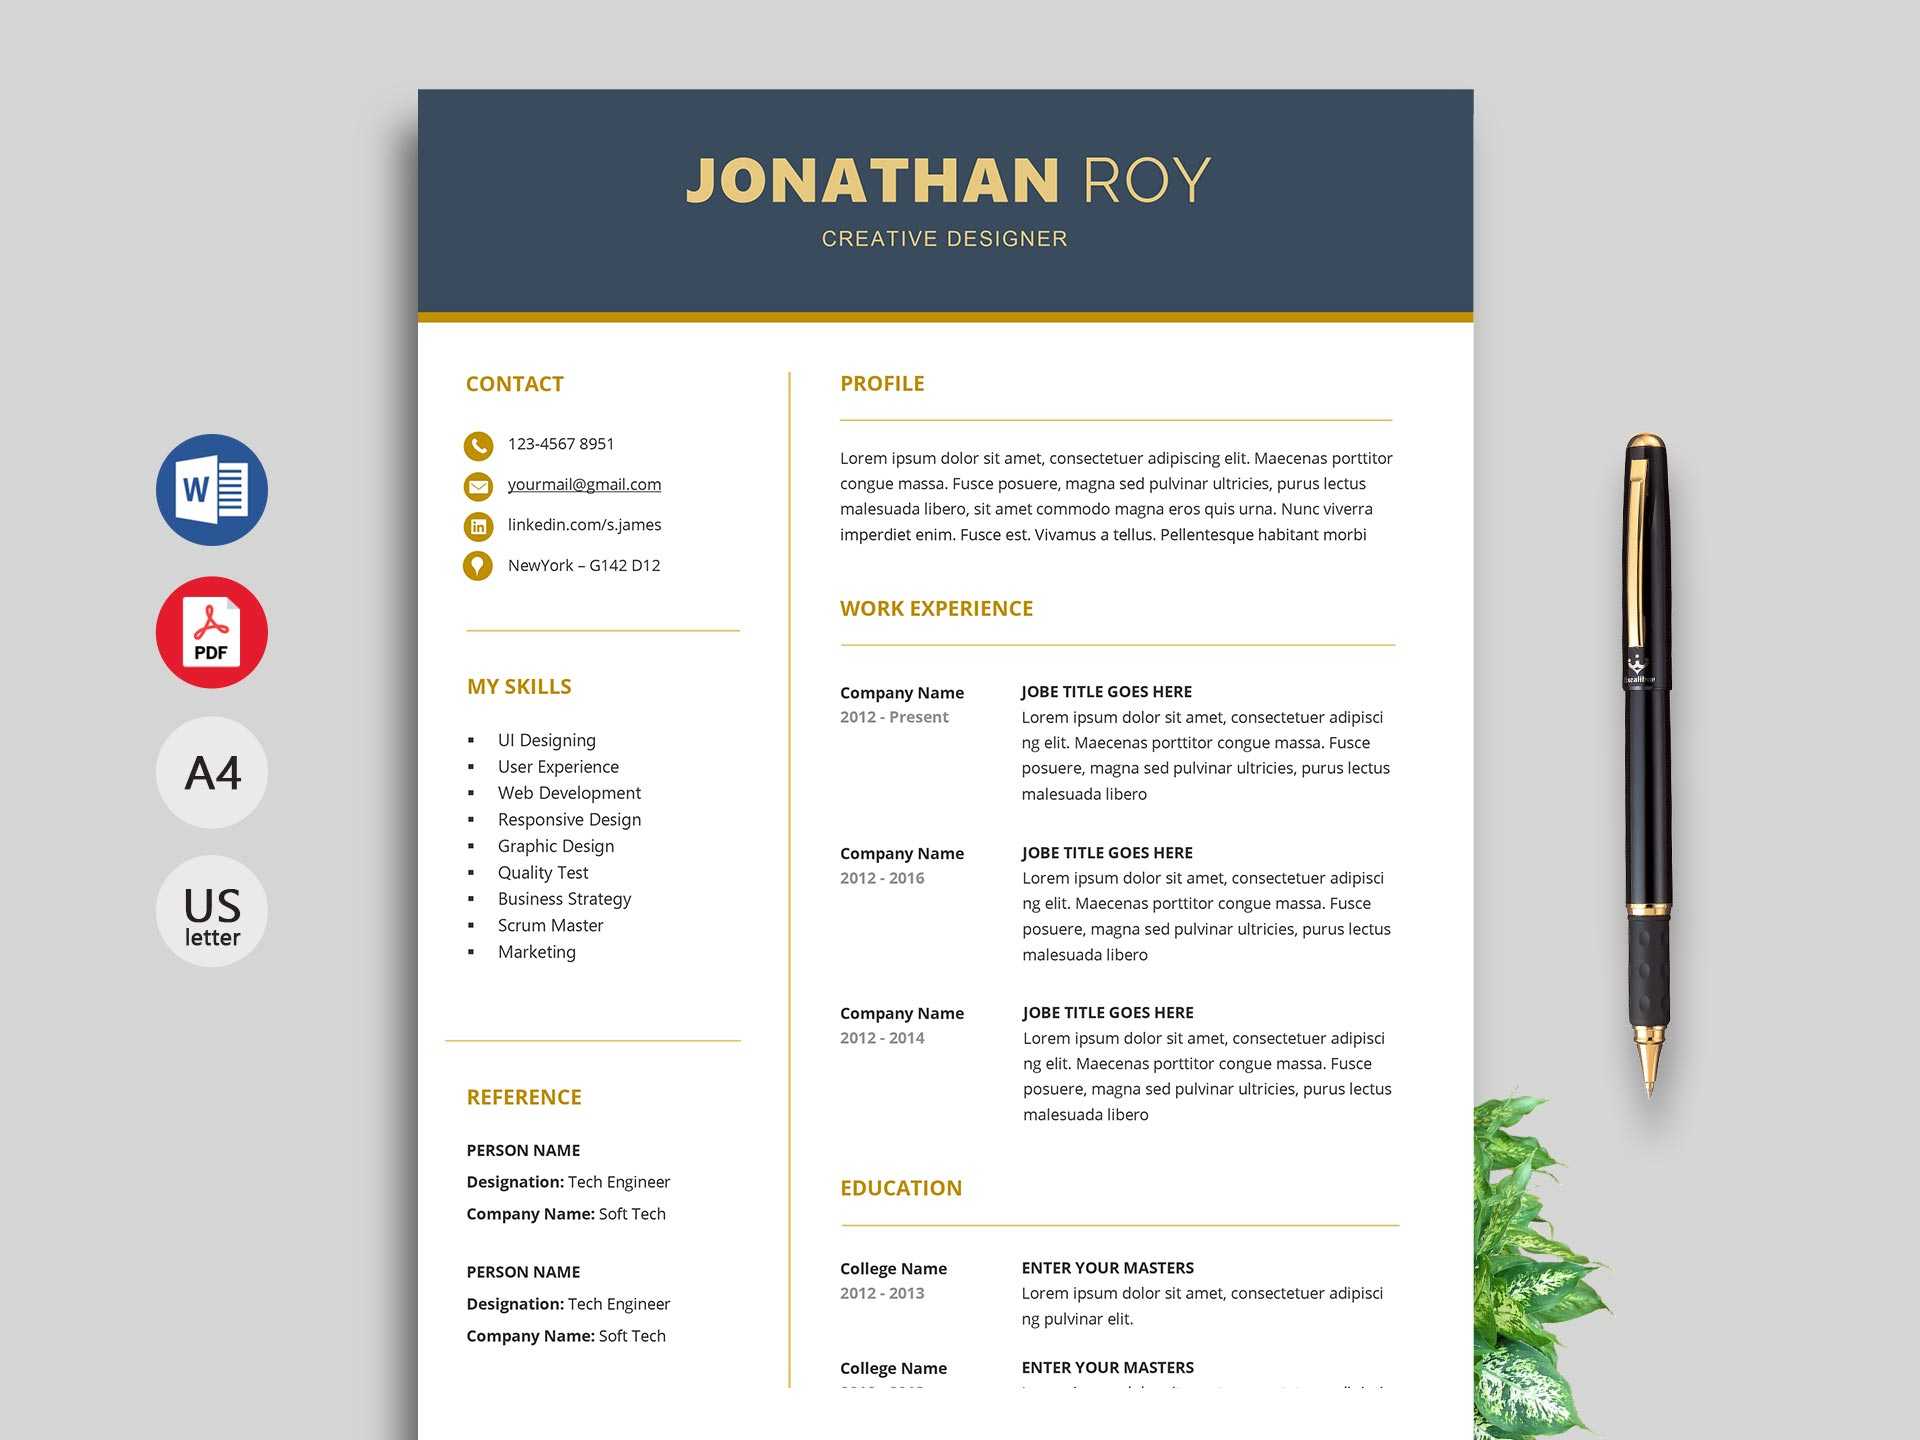 Free Simple Resume & Cv Templates Word Format 2019 | Resumekraft Intended For Free Downloadable Resume Templates For Word